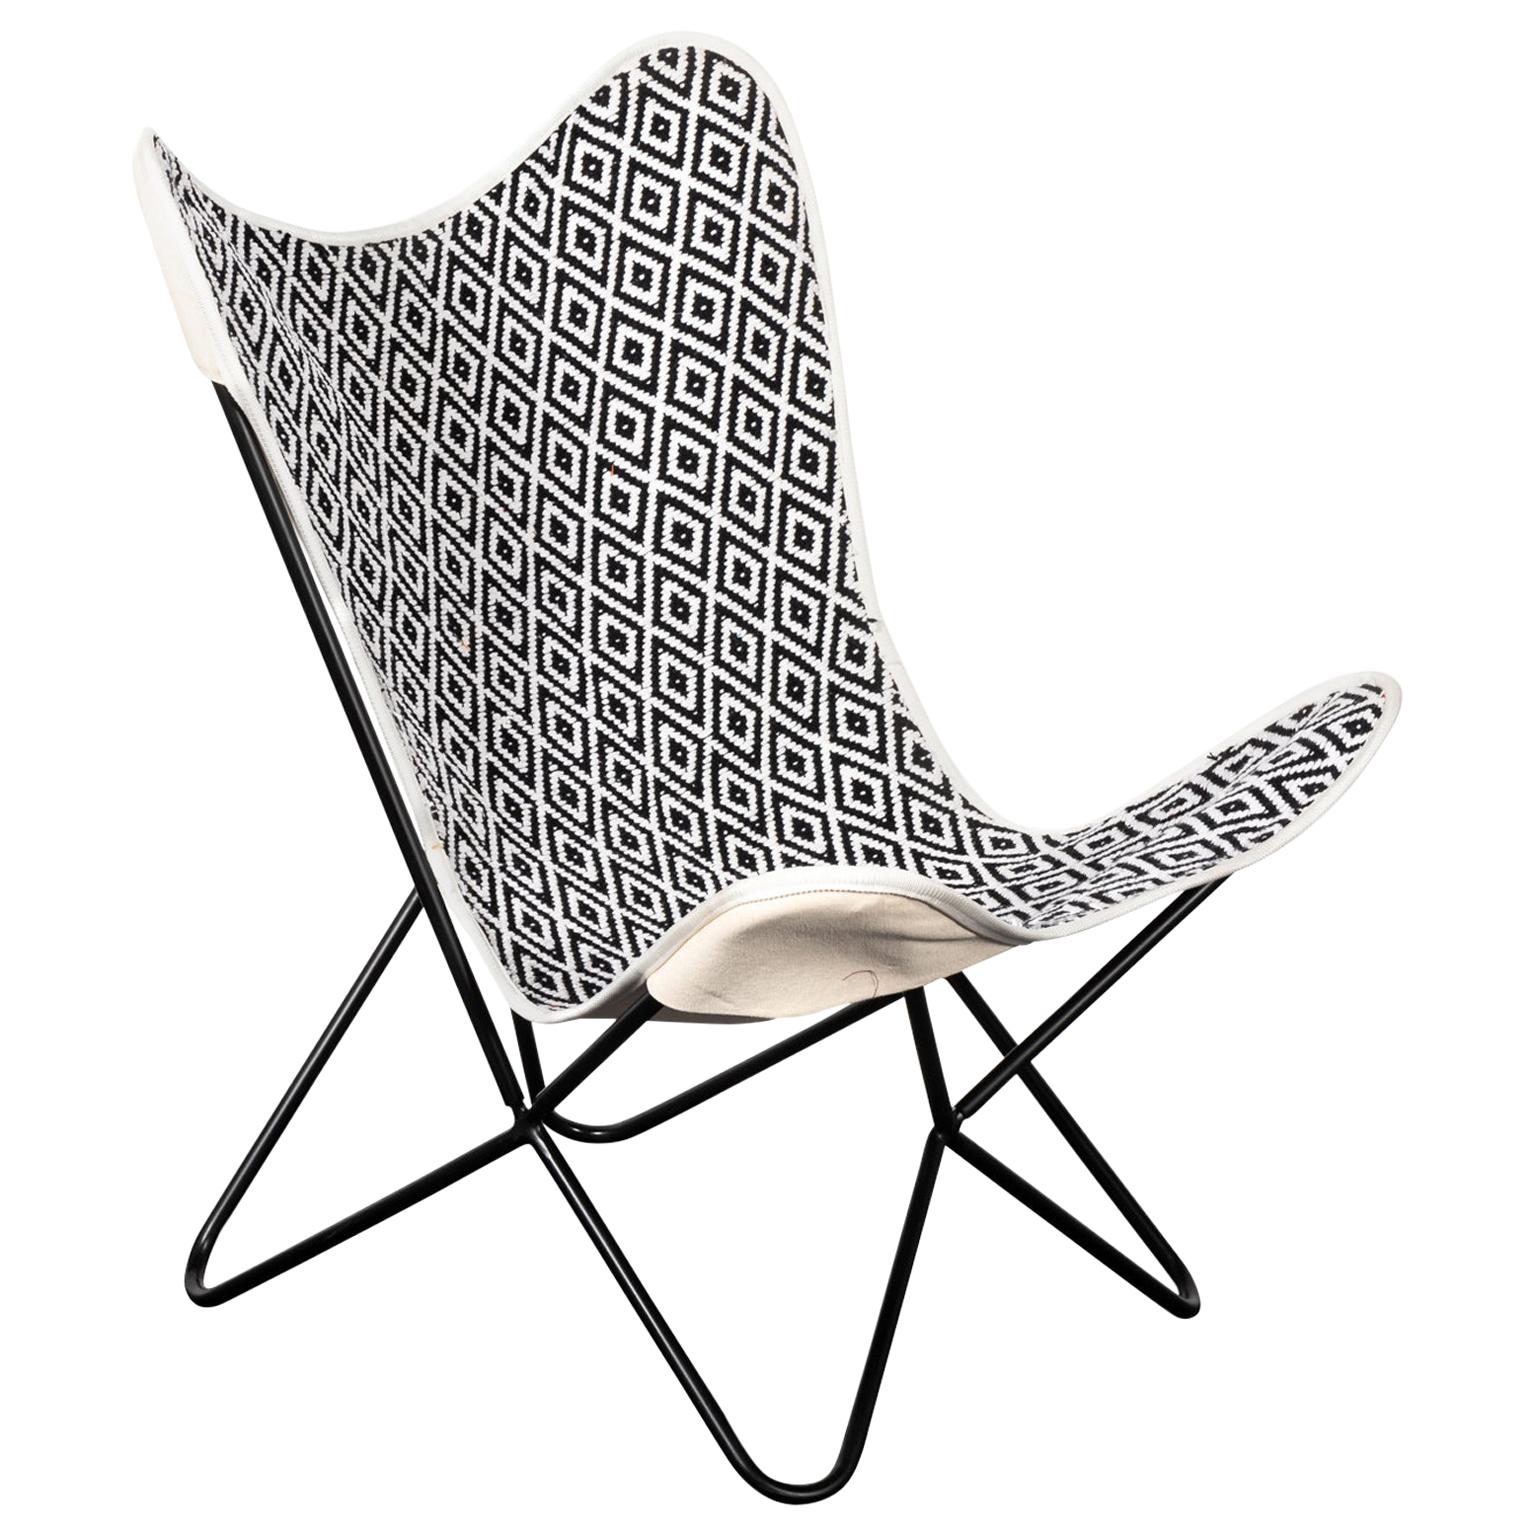 Black and White Butterfly Chair For Sale